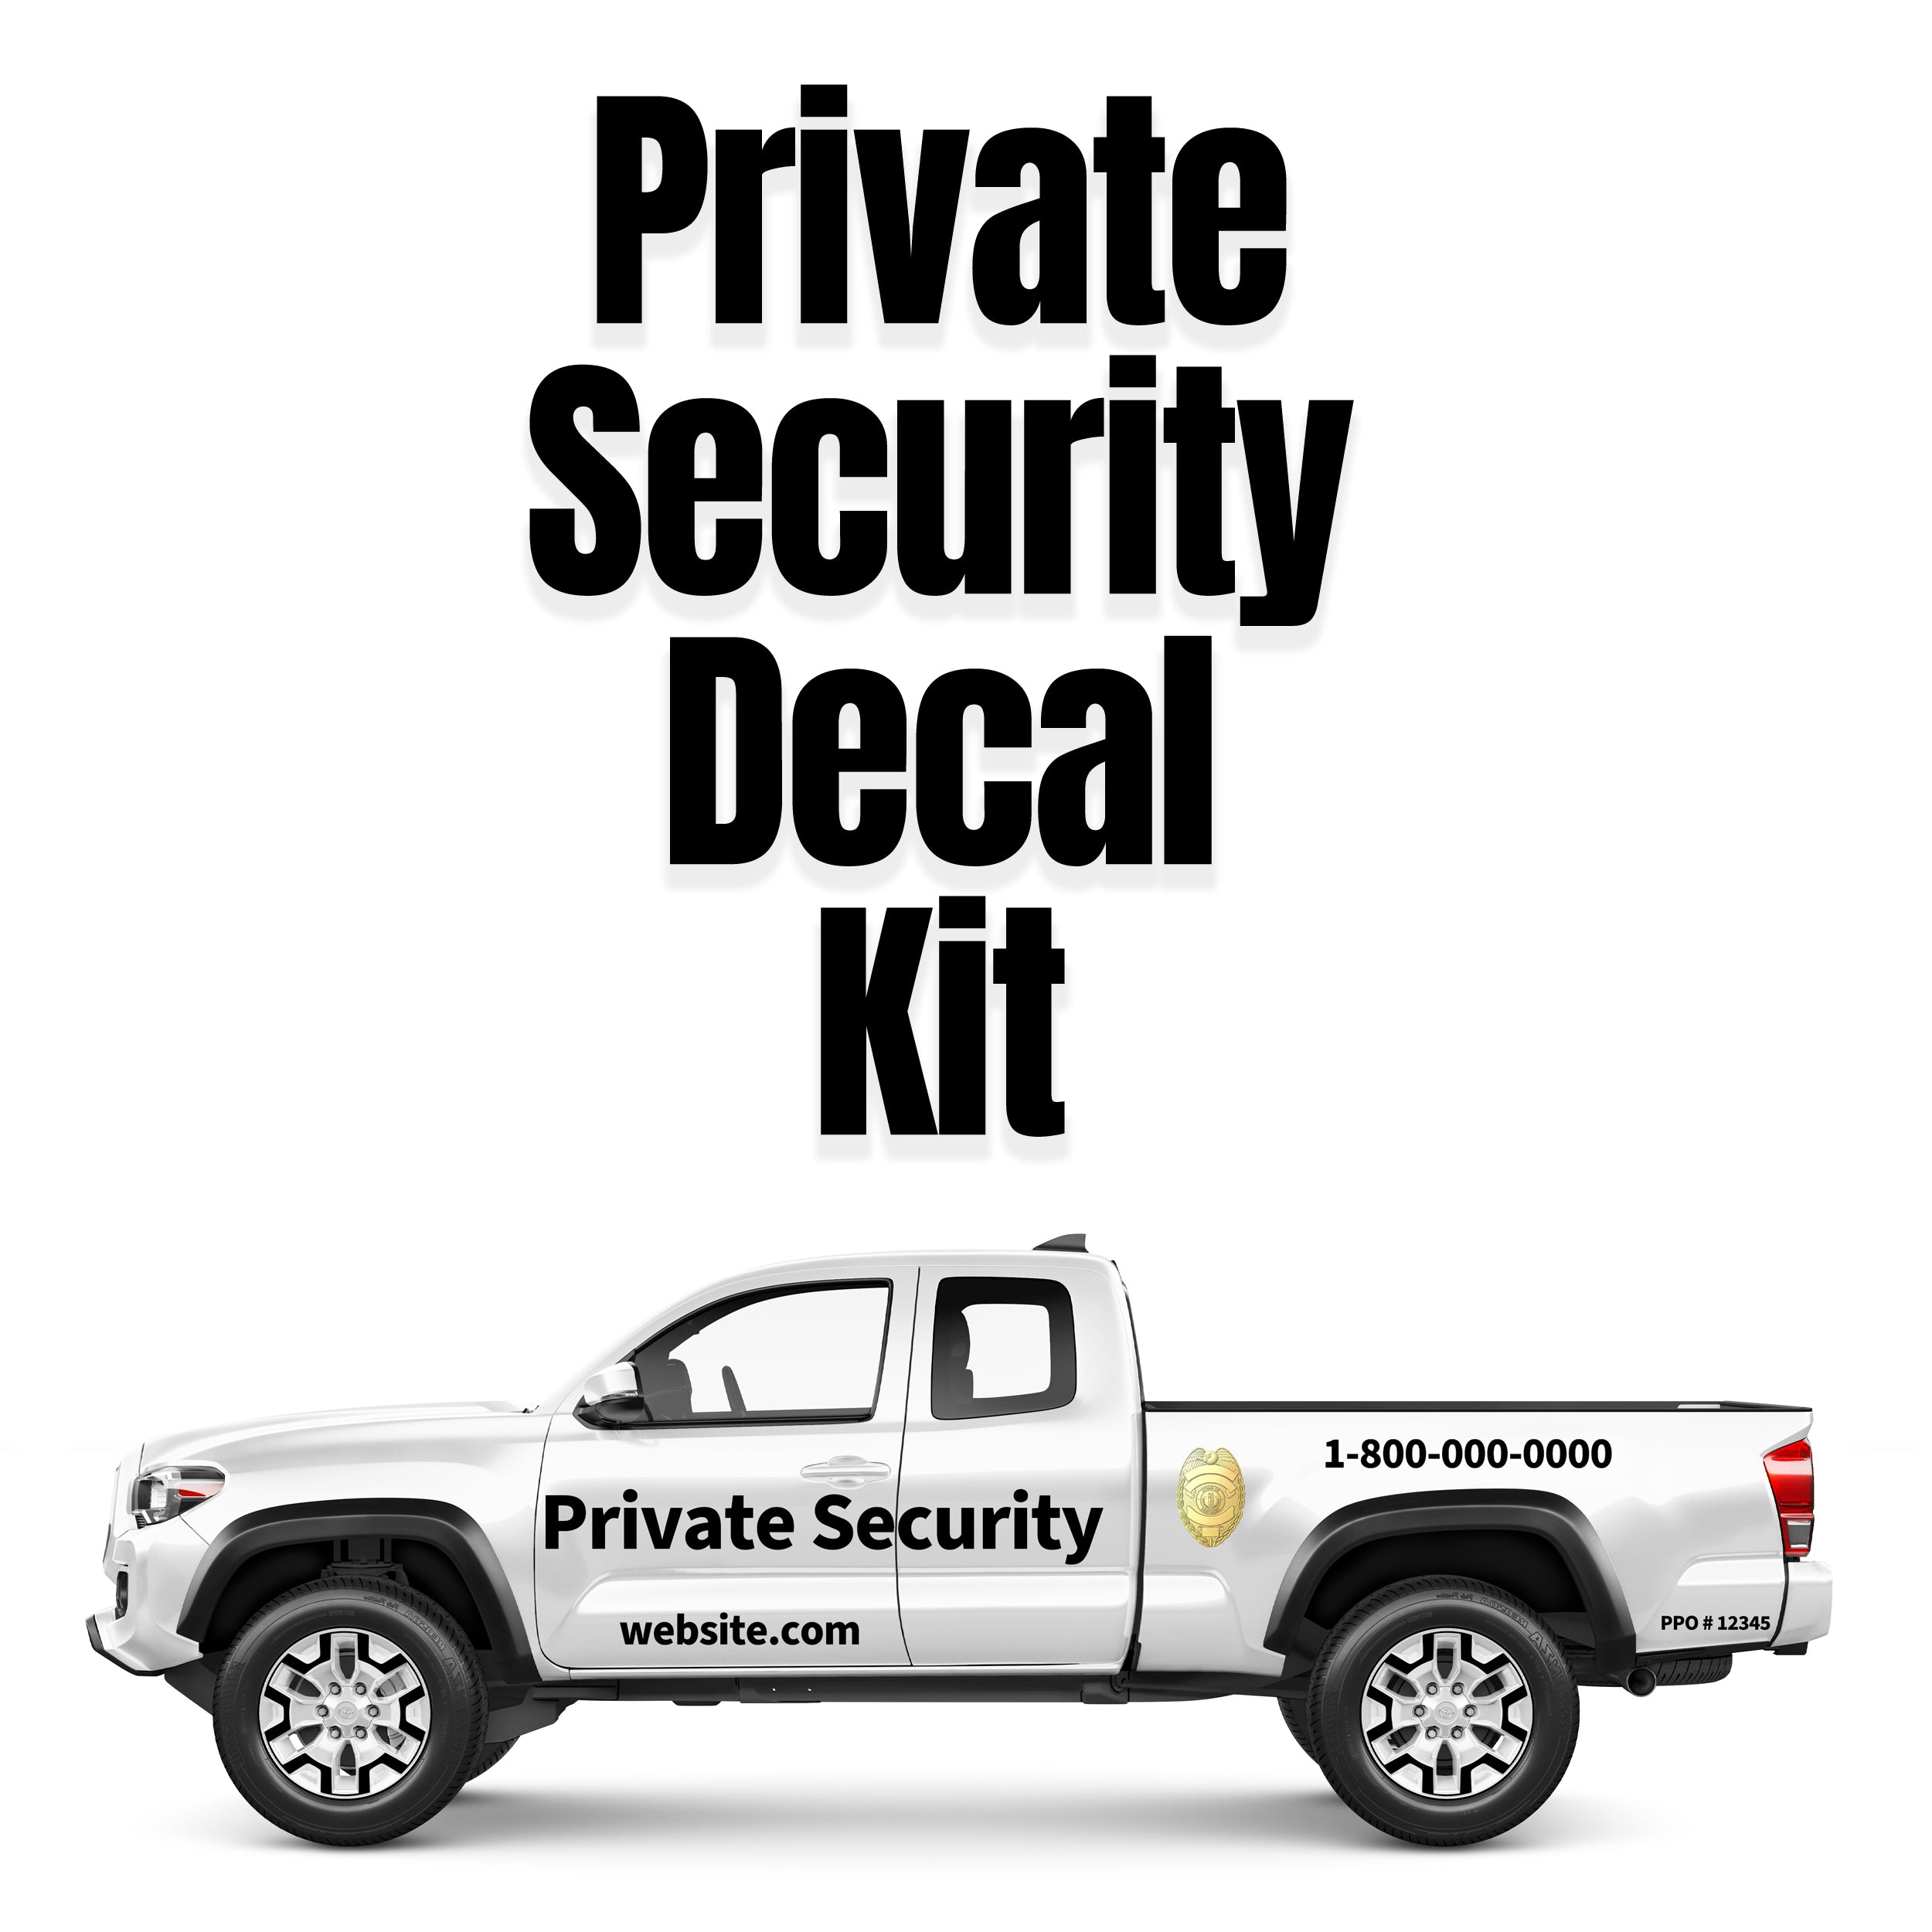 SECURITY BADGE Heavy Duty Vehicle Magnet Truck Car Sticker Decal